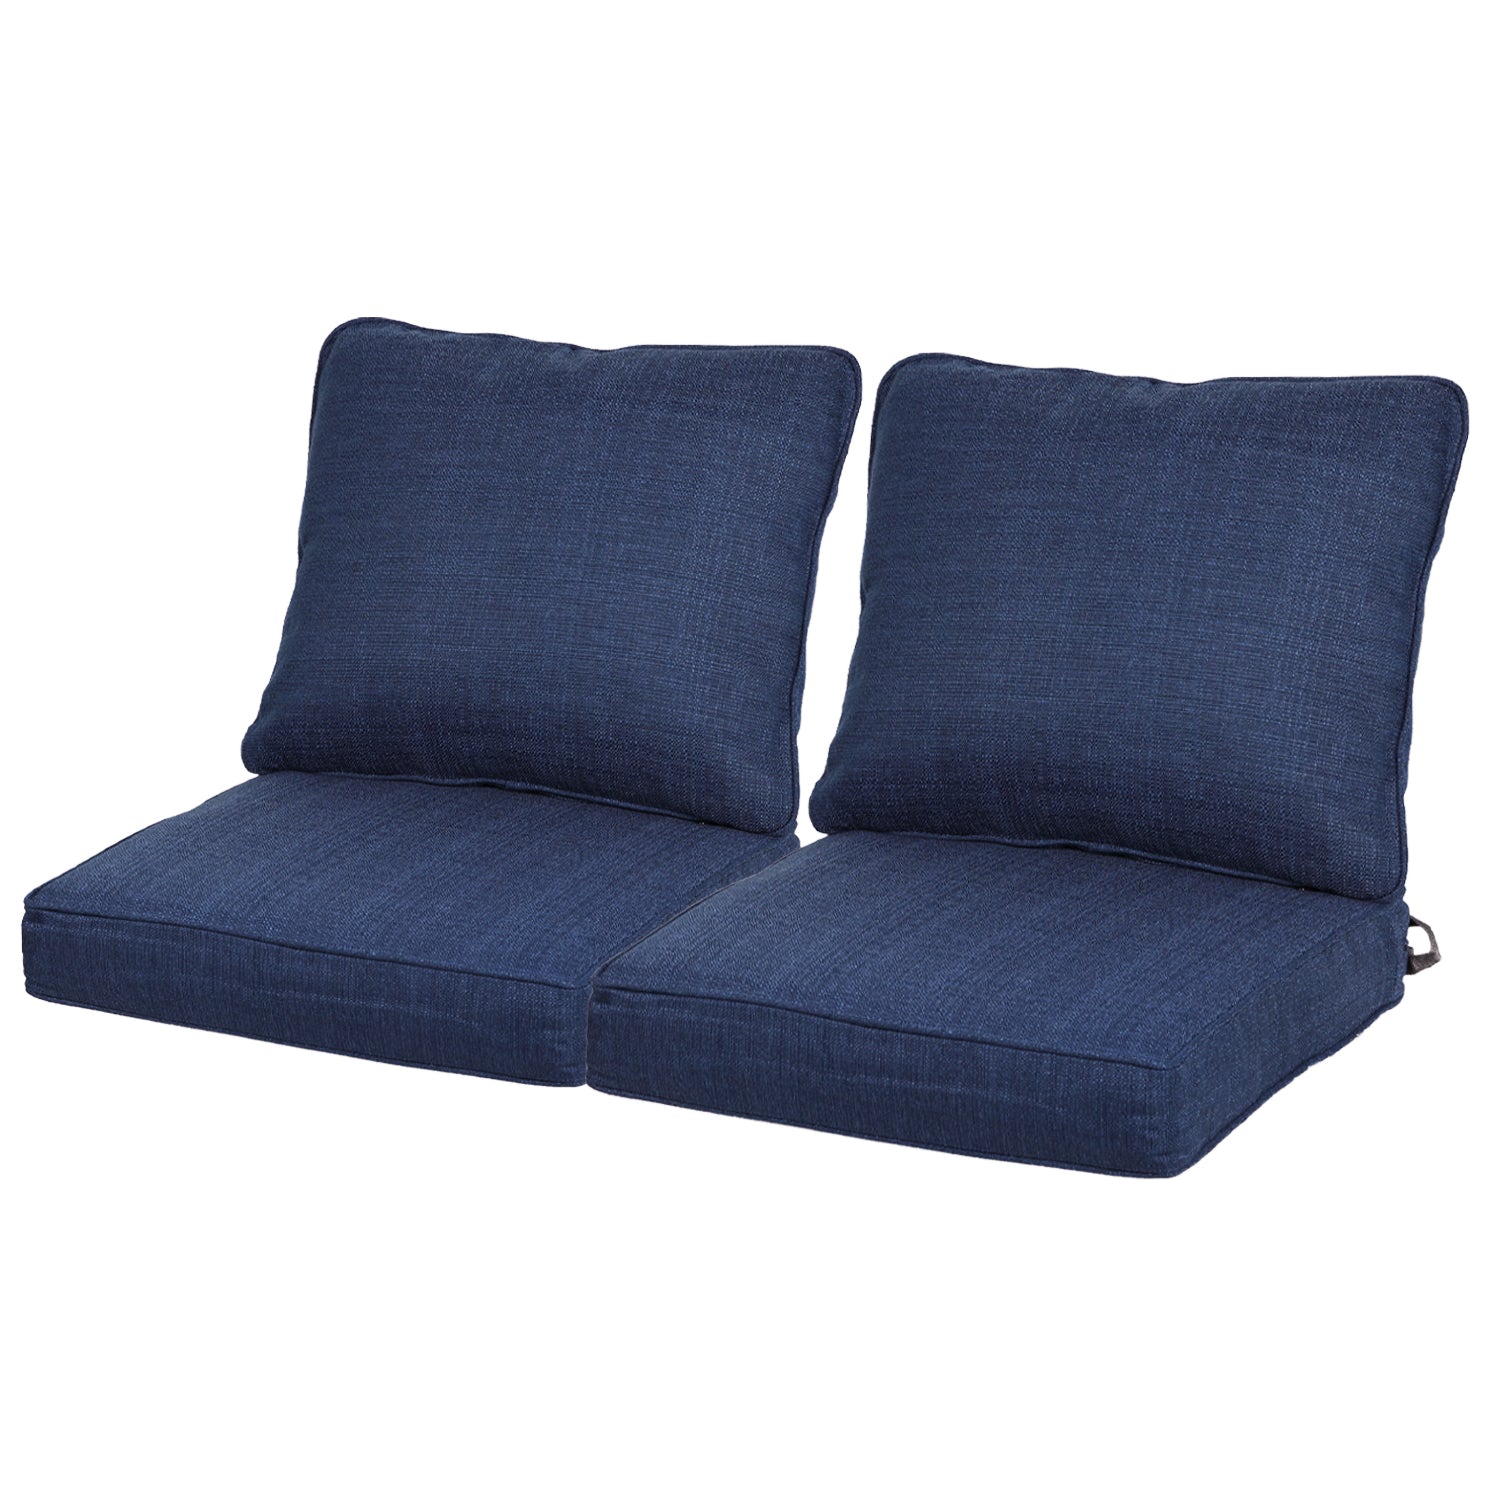 23'' x 24'' Outdoor Deep Seat Chair Cushion Set with Dust Jacket, Olefin Fabric Slipcover - Set of 2 (2 Back, 2 Seater ) CUSHION Aoodor LLC Navy Blue  